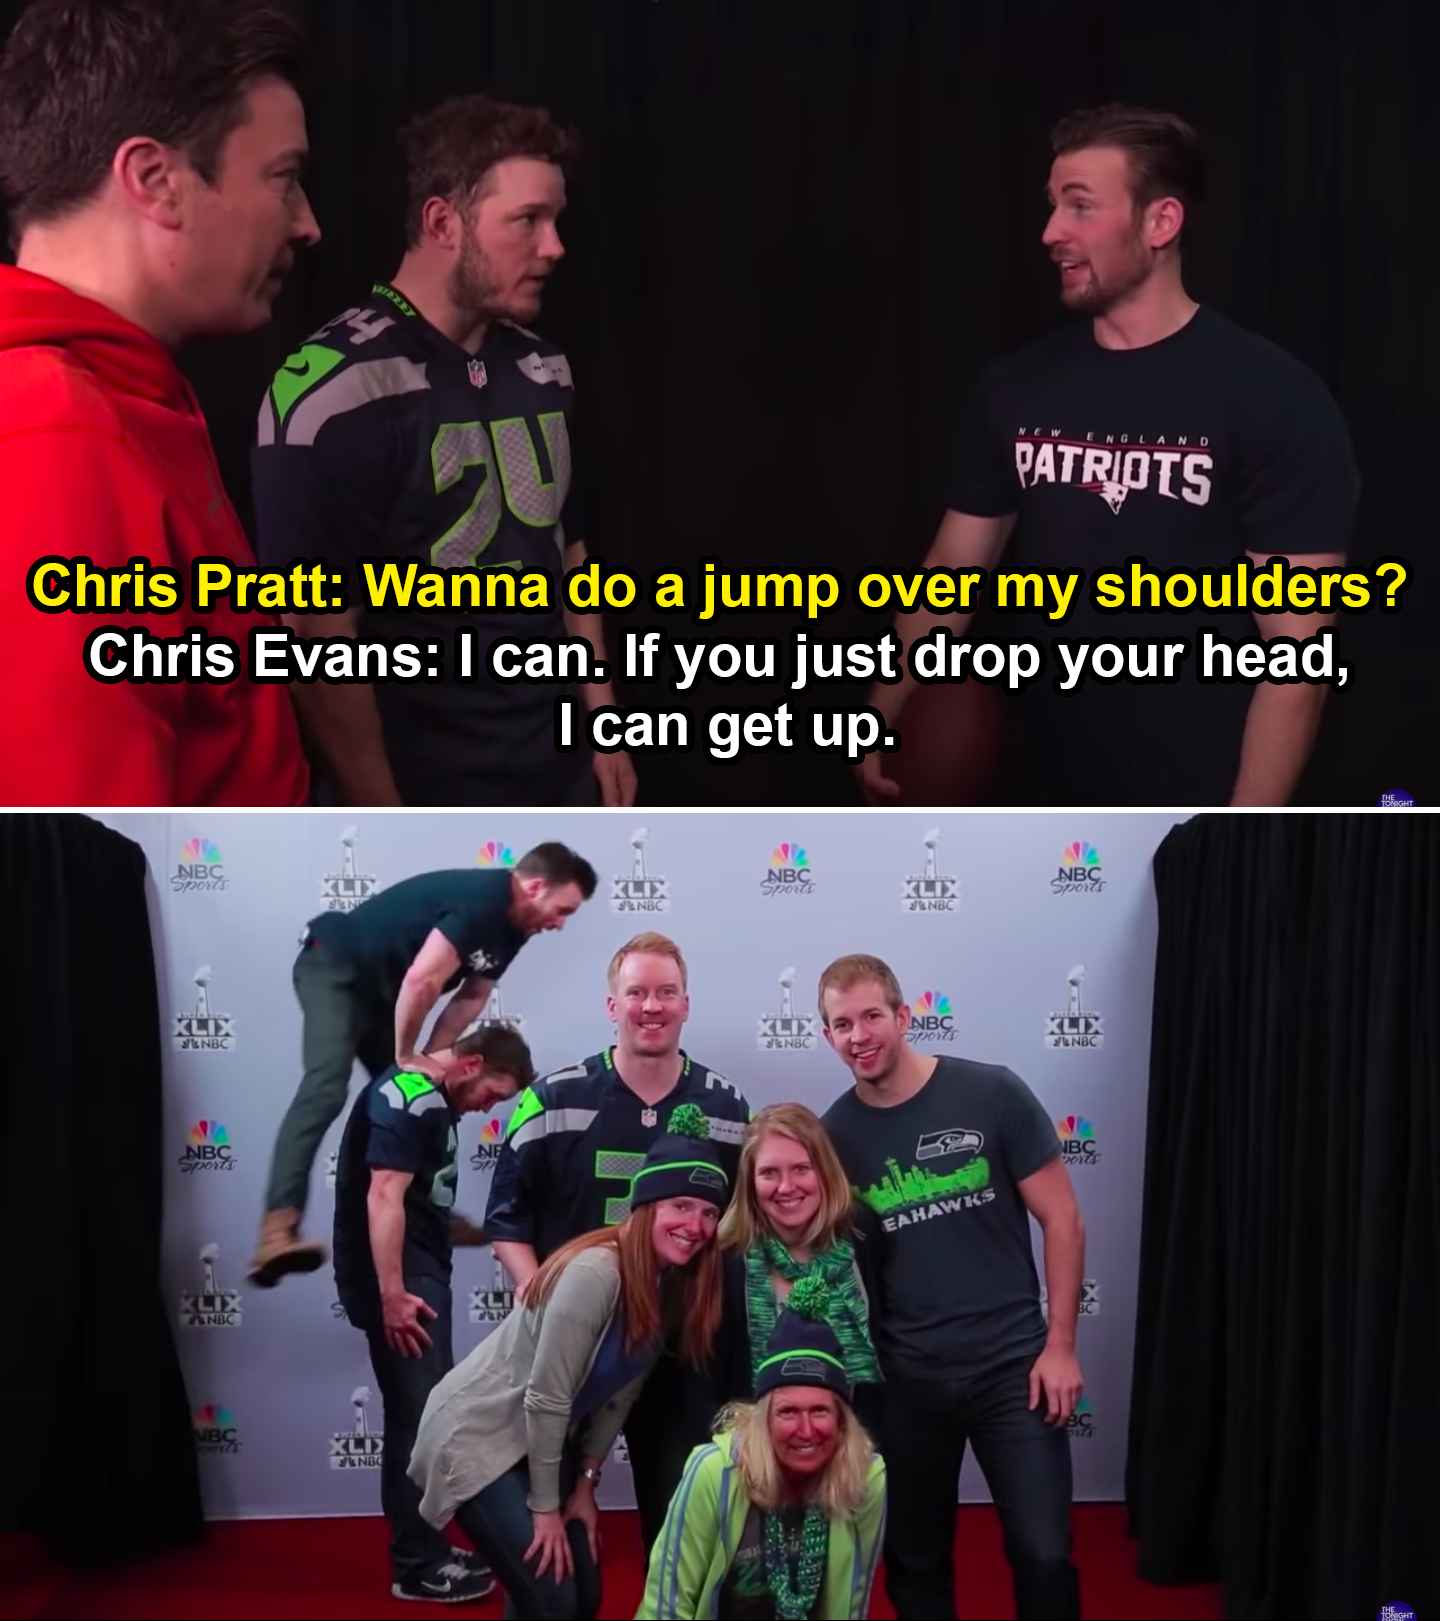 Chris Evans saying to Chris Pratt, &quot;If you just drop your head, I can get up&quot; and then leapfrogging over a standing Chris Pratt